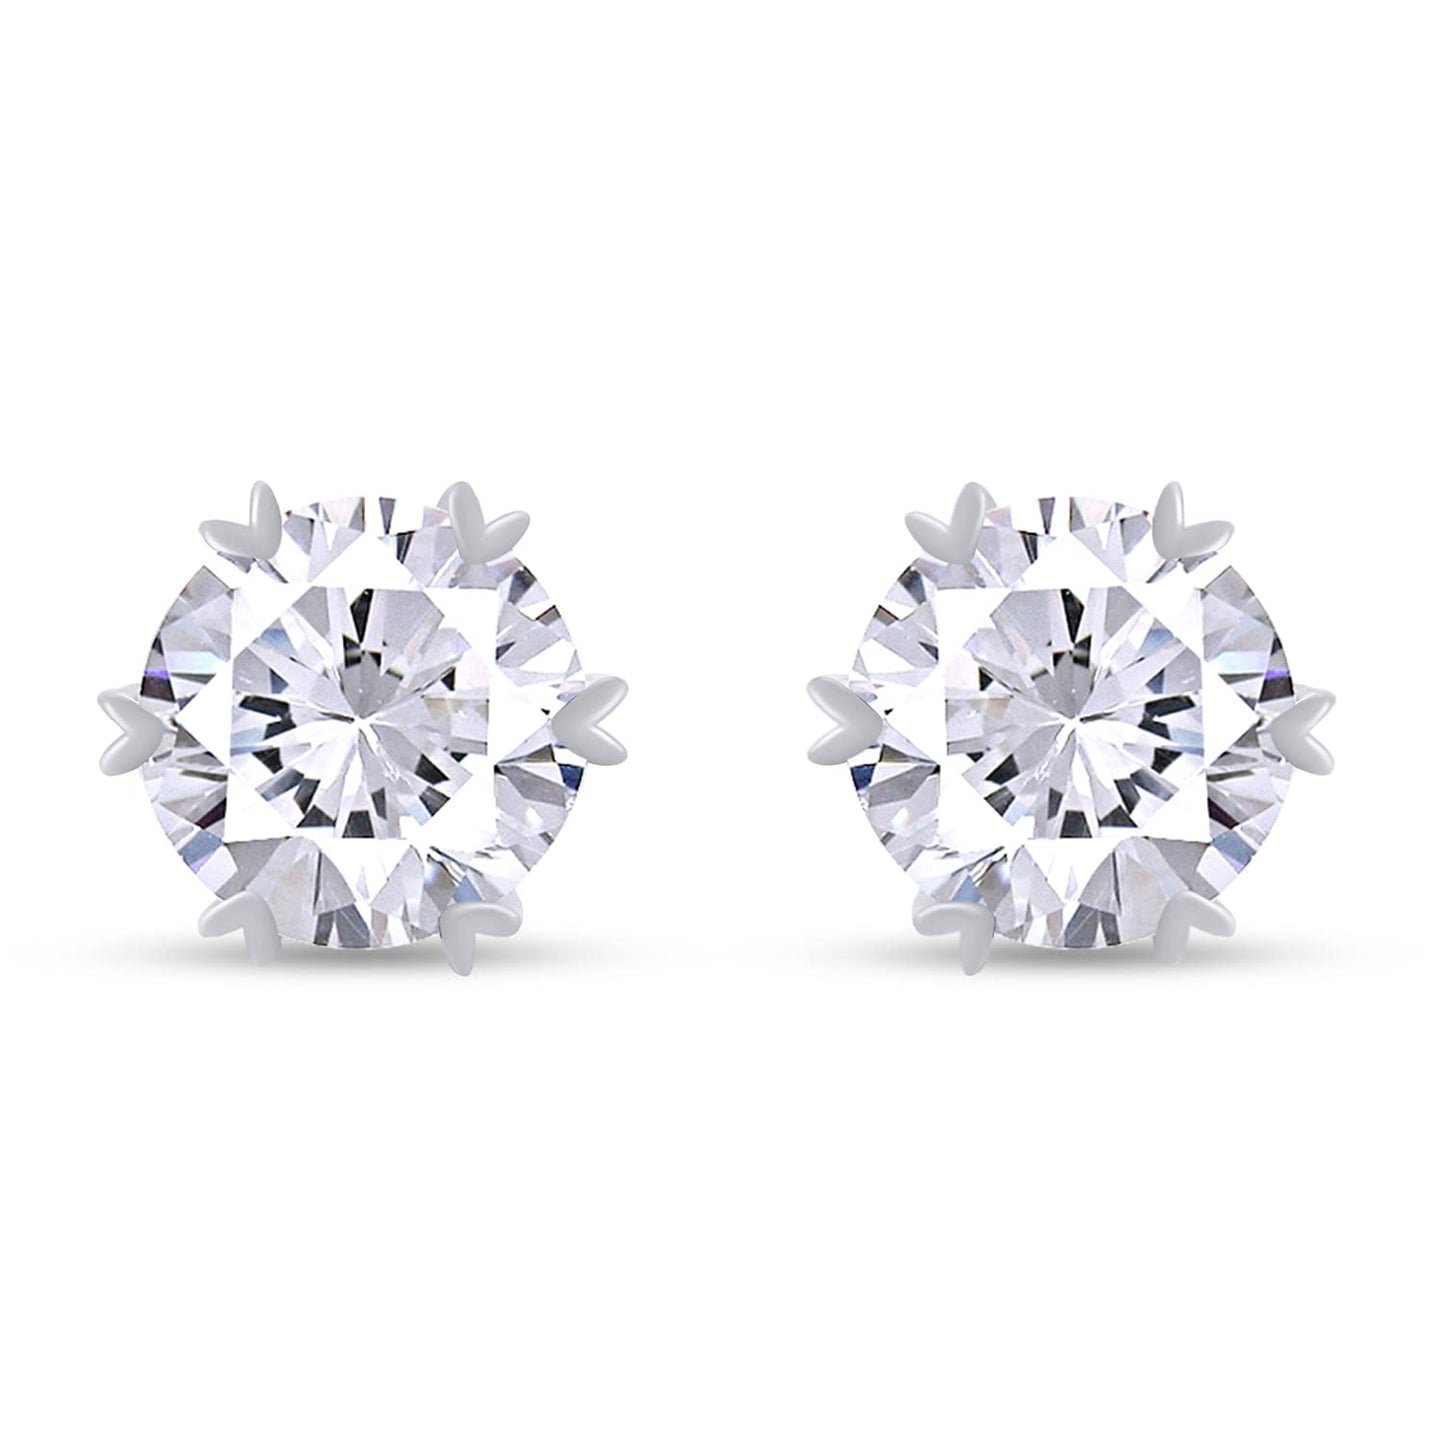 1 Carat Round Cut Lab Created Moissanite Diamond Push Back Studs Earrings In 925 Sterling Silver (1 Cttw)